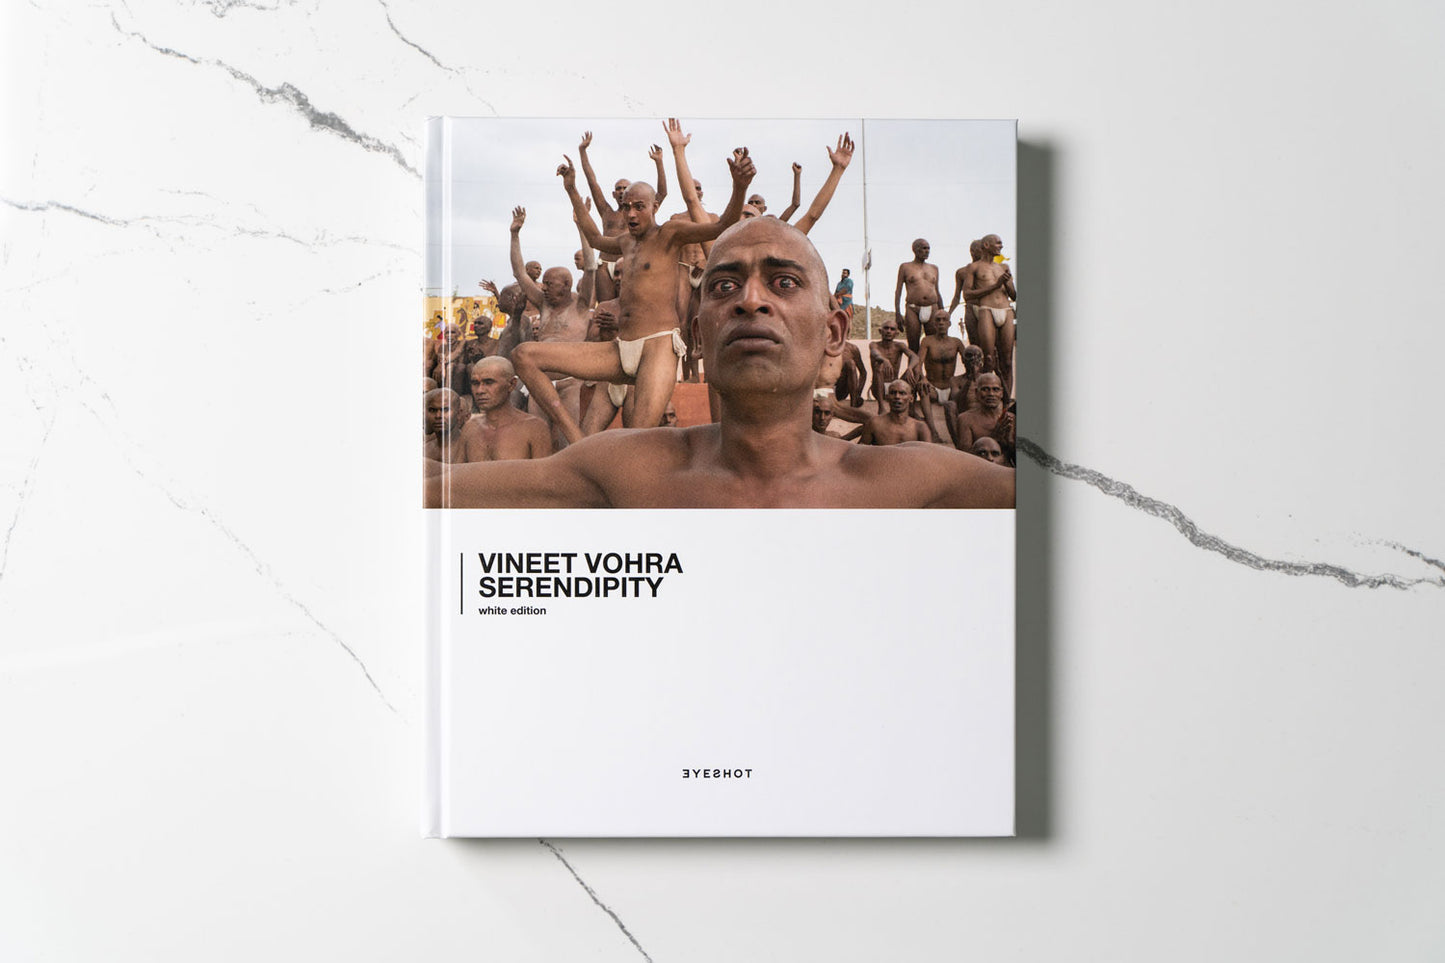 Serendipity by Vineet Vohra (White Edition, signed and numbered)